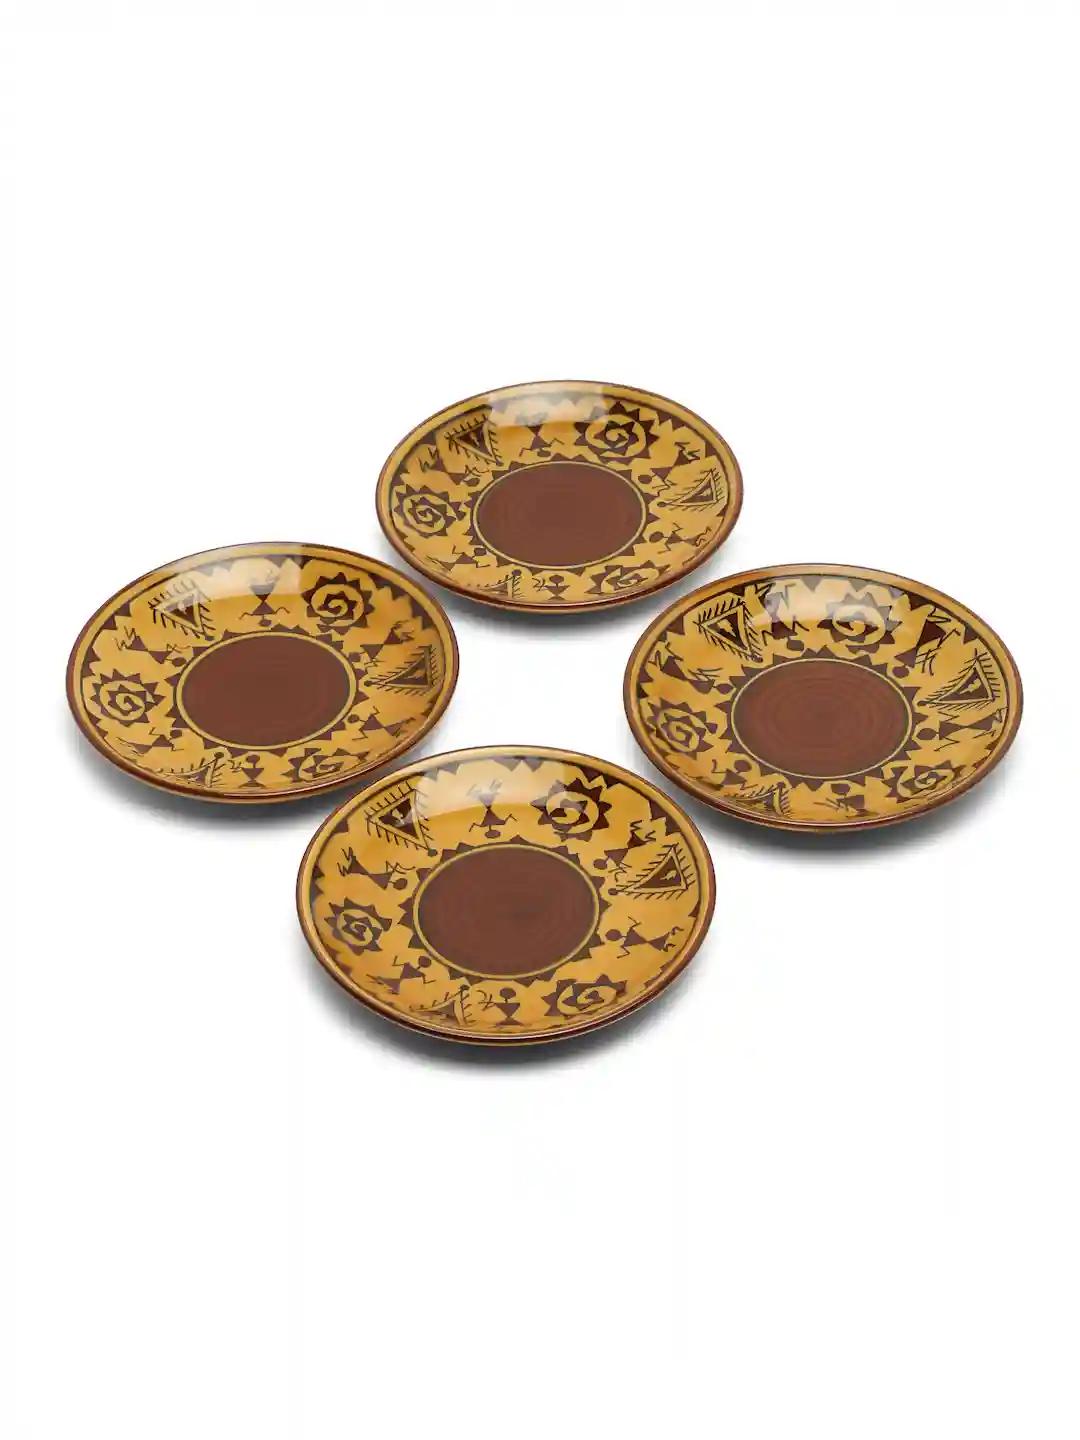 Shilpkara "The Madhubani Tales" Hand Painted Small Ceramic Quarter & Side Plates for Snacks 7 Inches